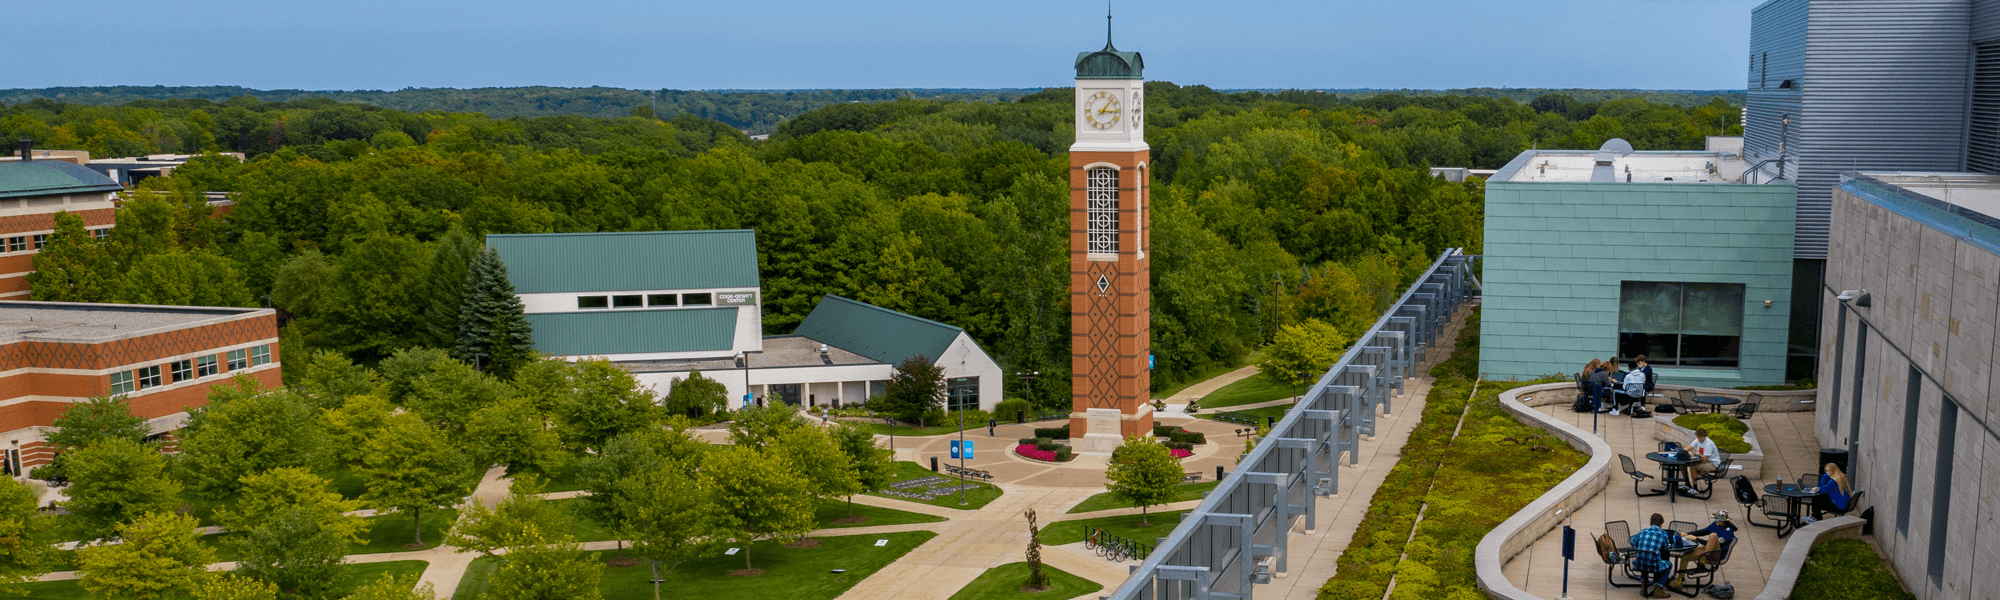 Photo of the Cook Carillon Clock Tower on the Allendale campus.